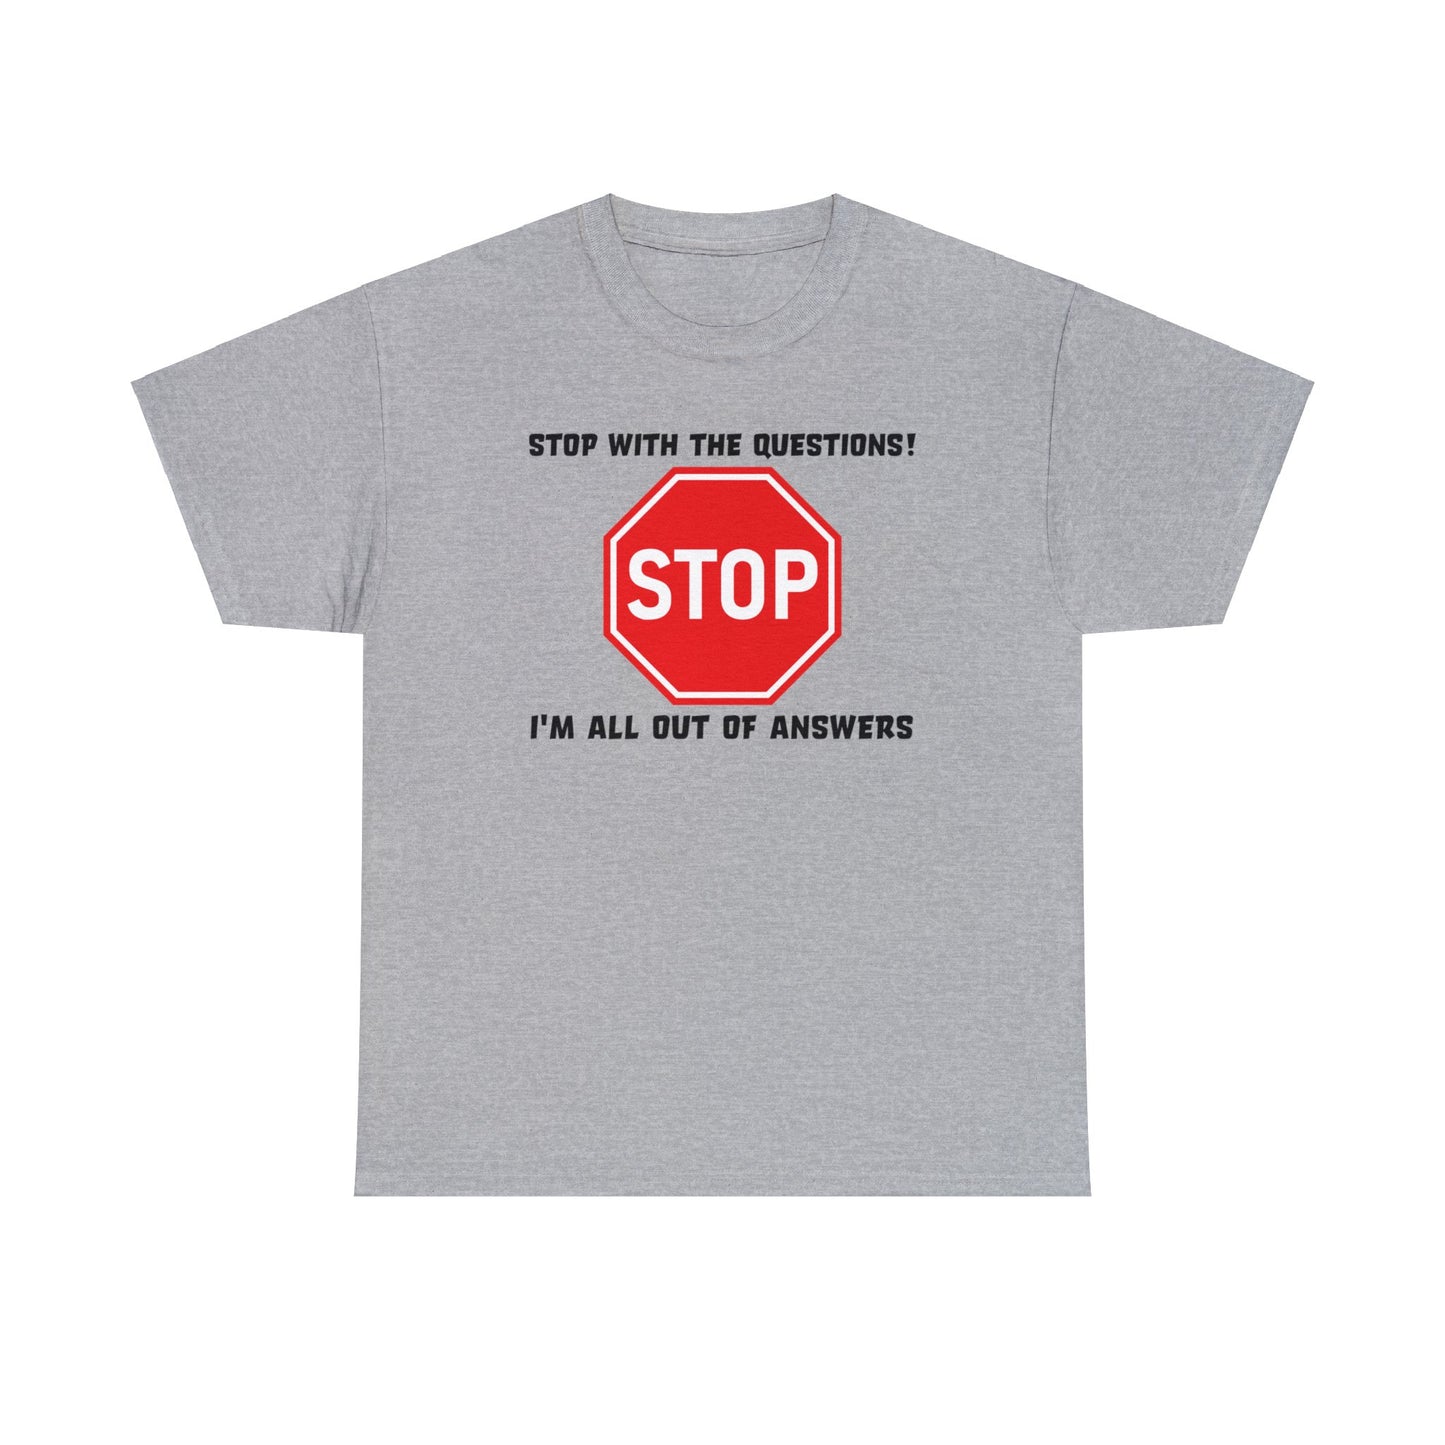 Stop With The Questions TShirt For No More Answers TShirt For Be Quiet T Shirt